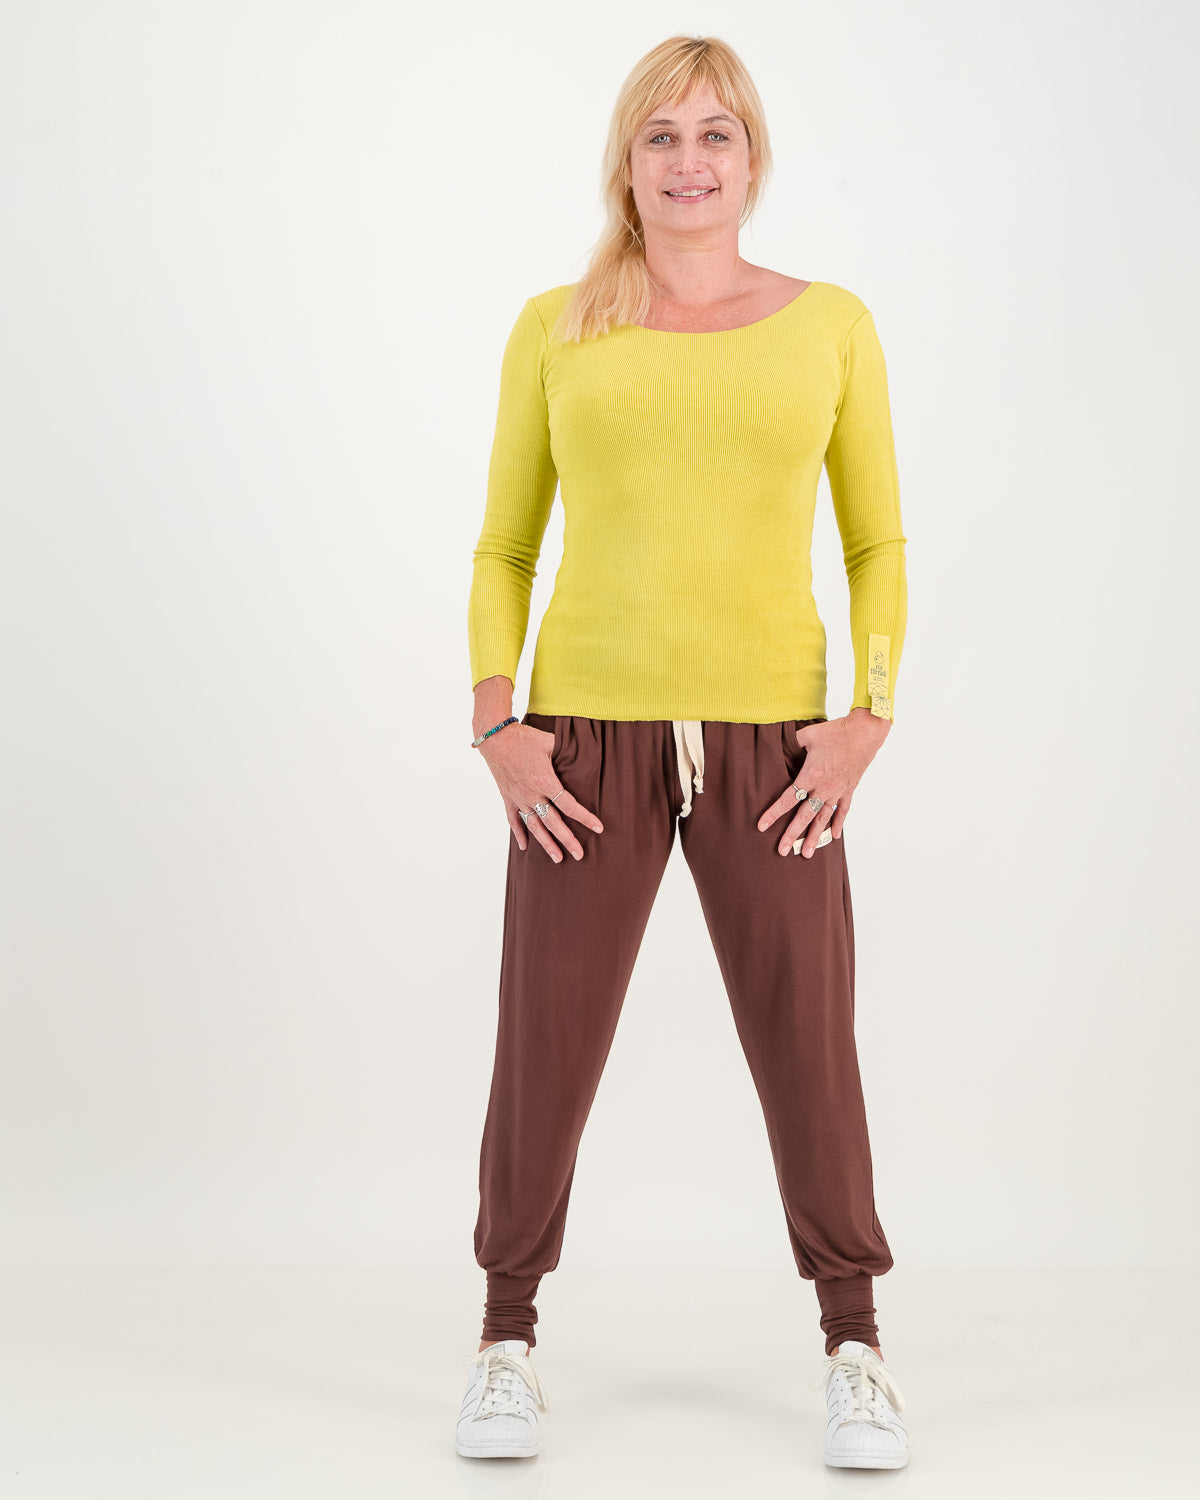 Loose fitting comfy pants, chocolate color with a chartreuse top with 